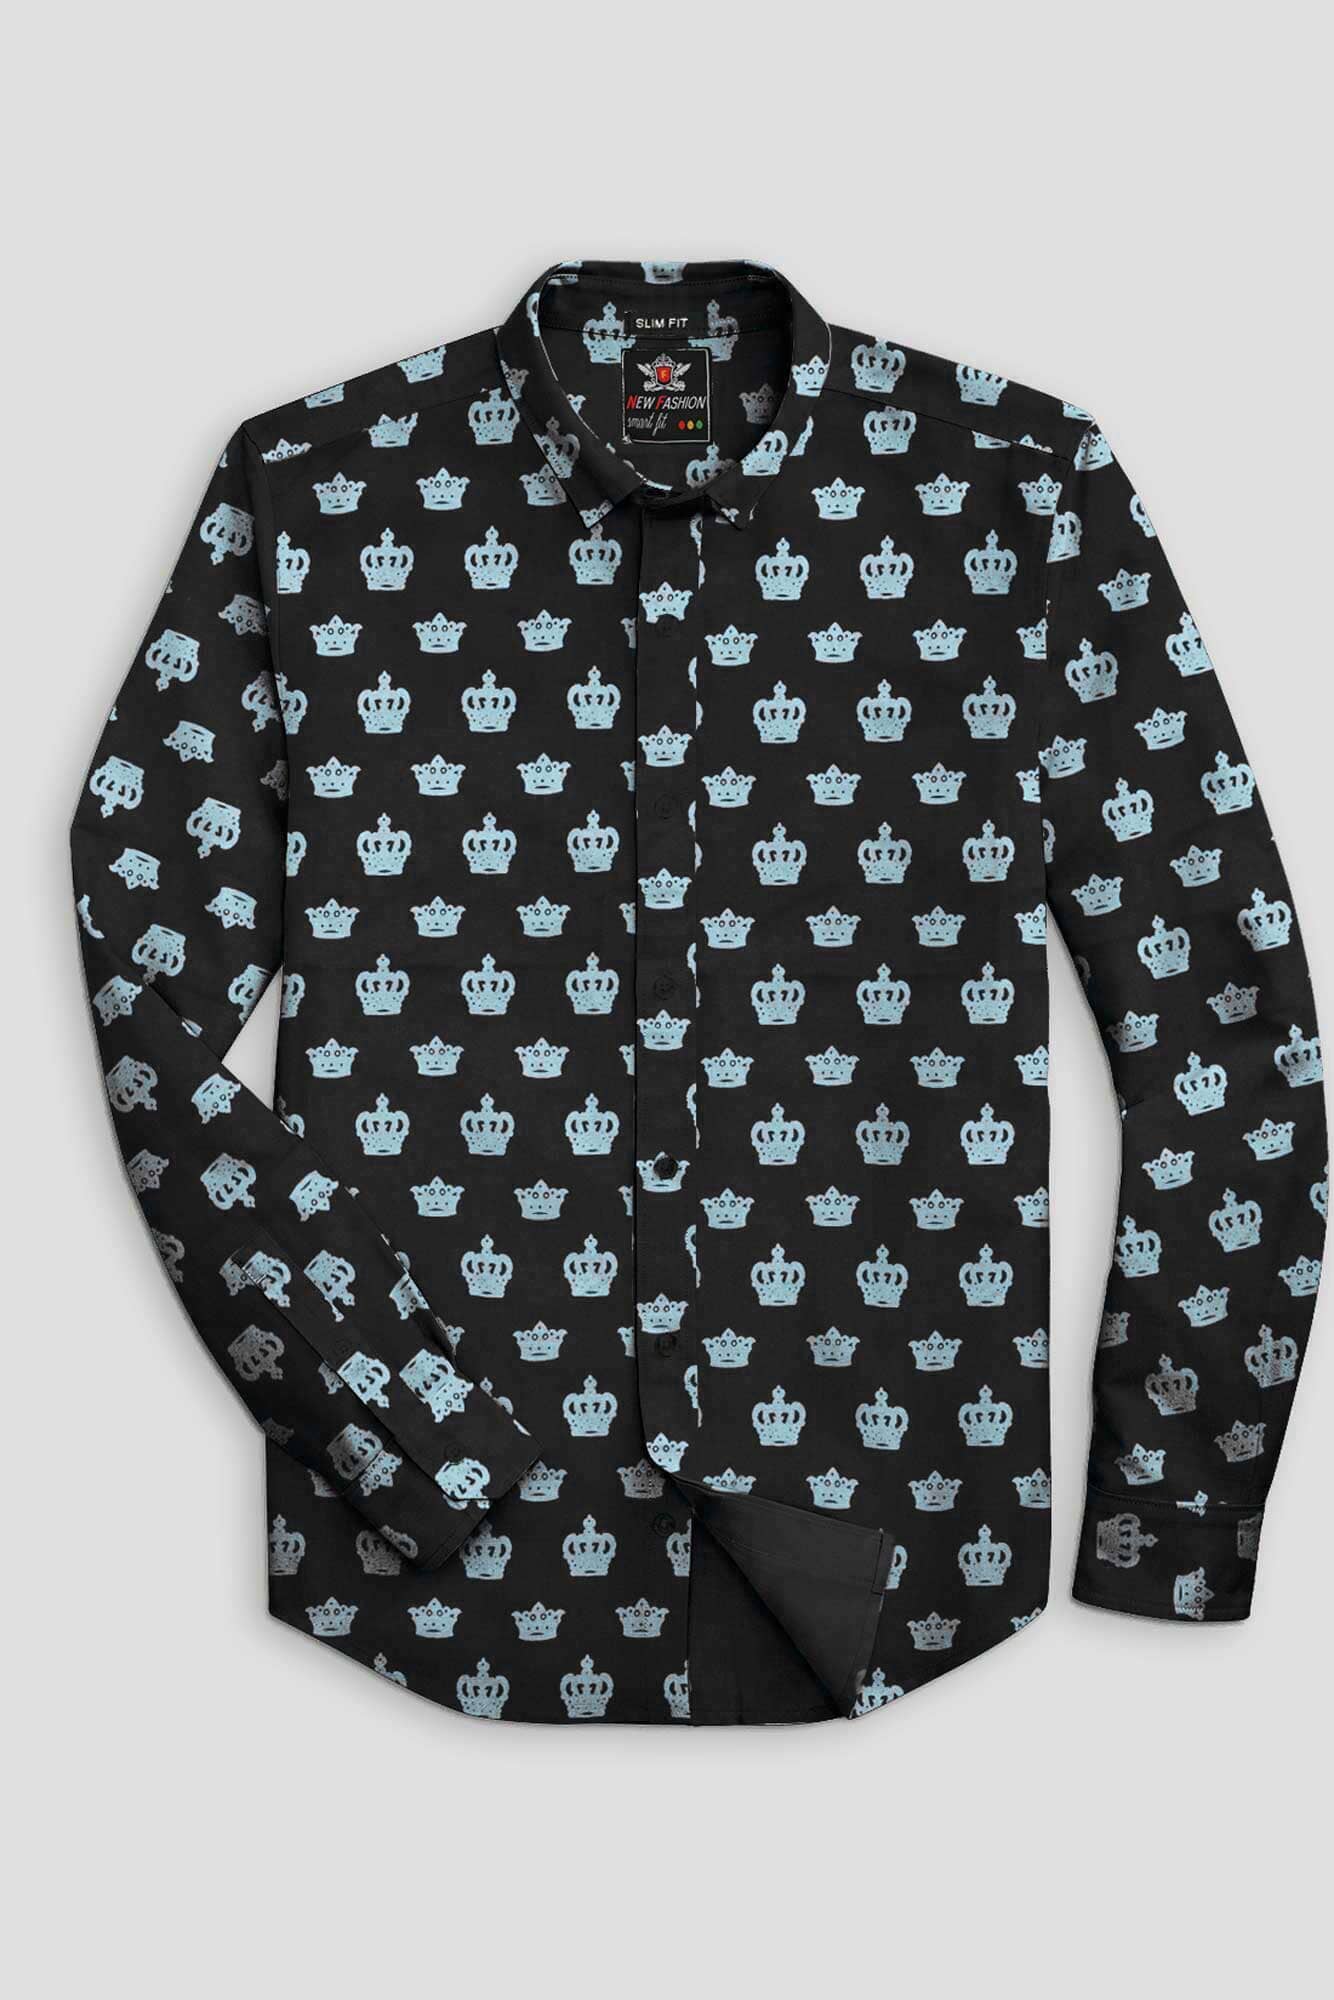 Fashion Men's Crown Printed Design Slim Fit Casual Shirt Men's Casual Shirt First Choice Black & Turquoise S 